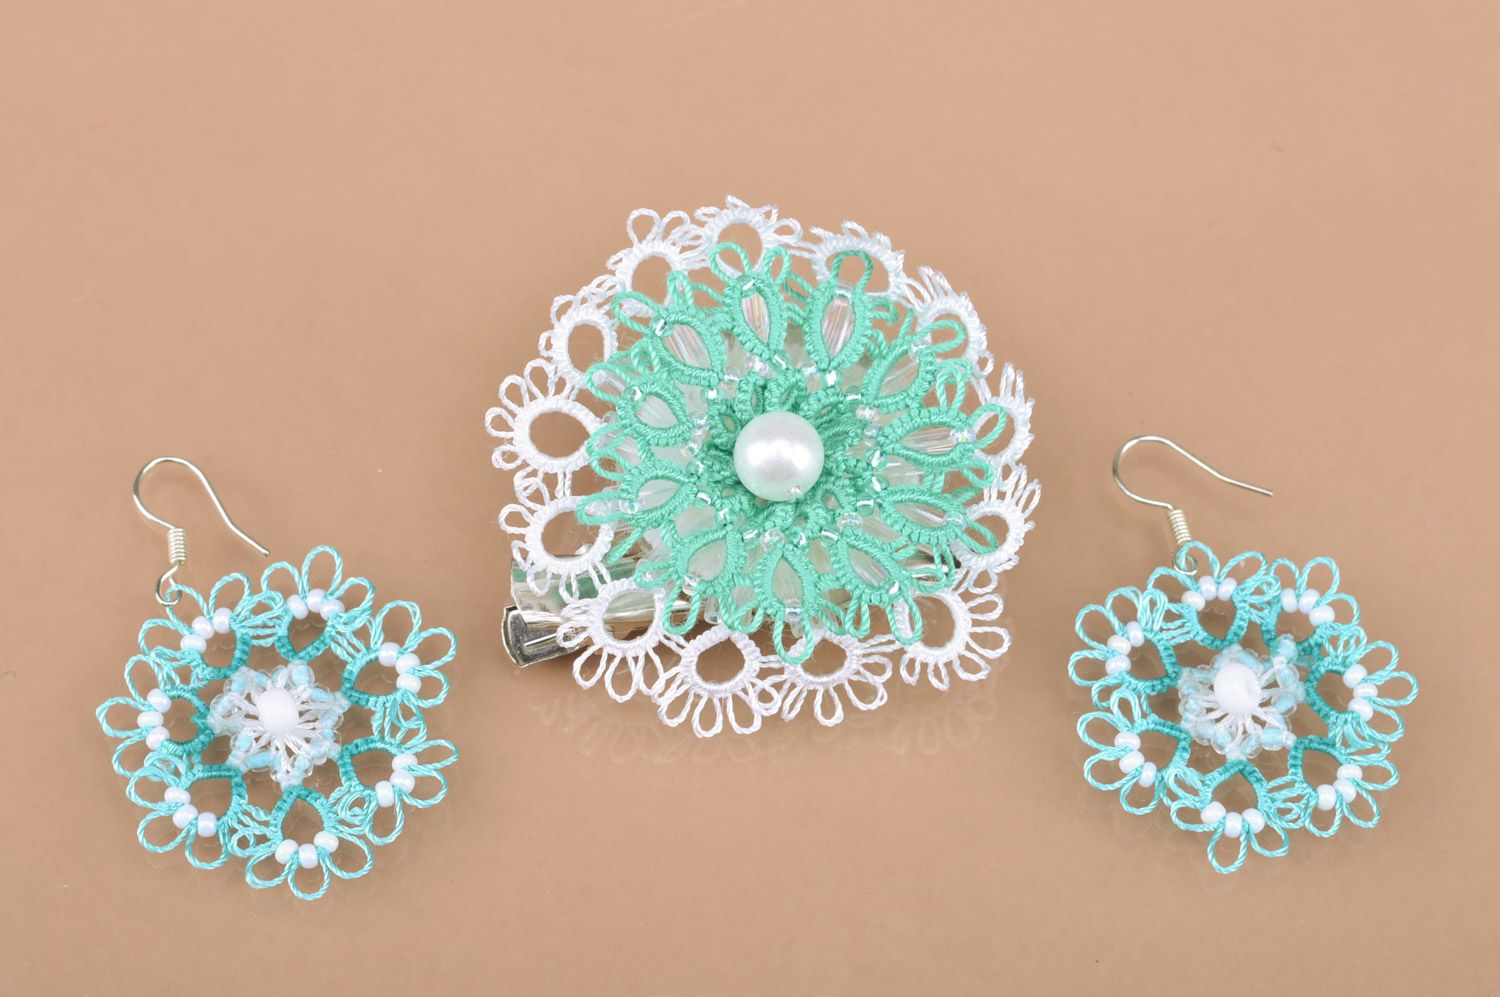 Handmade tatting woven jewelry set 2 items turquoise earrings and brooch hair clip photo 1